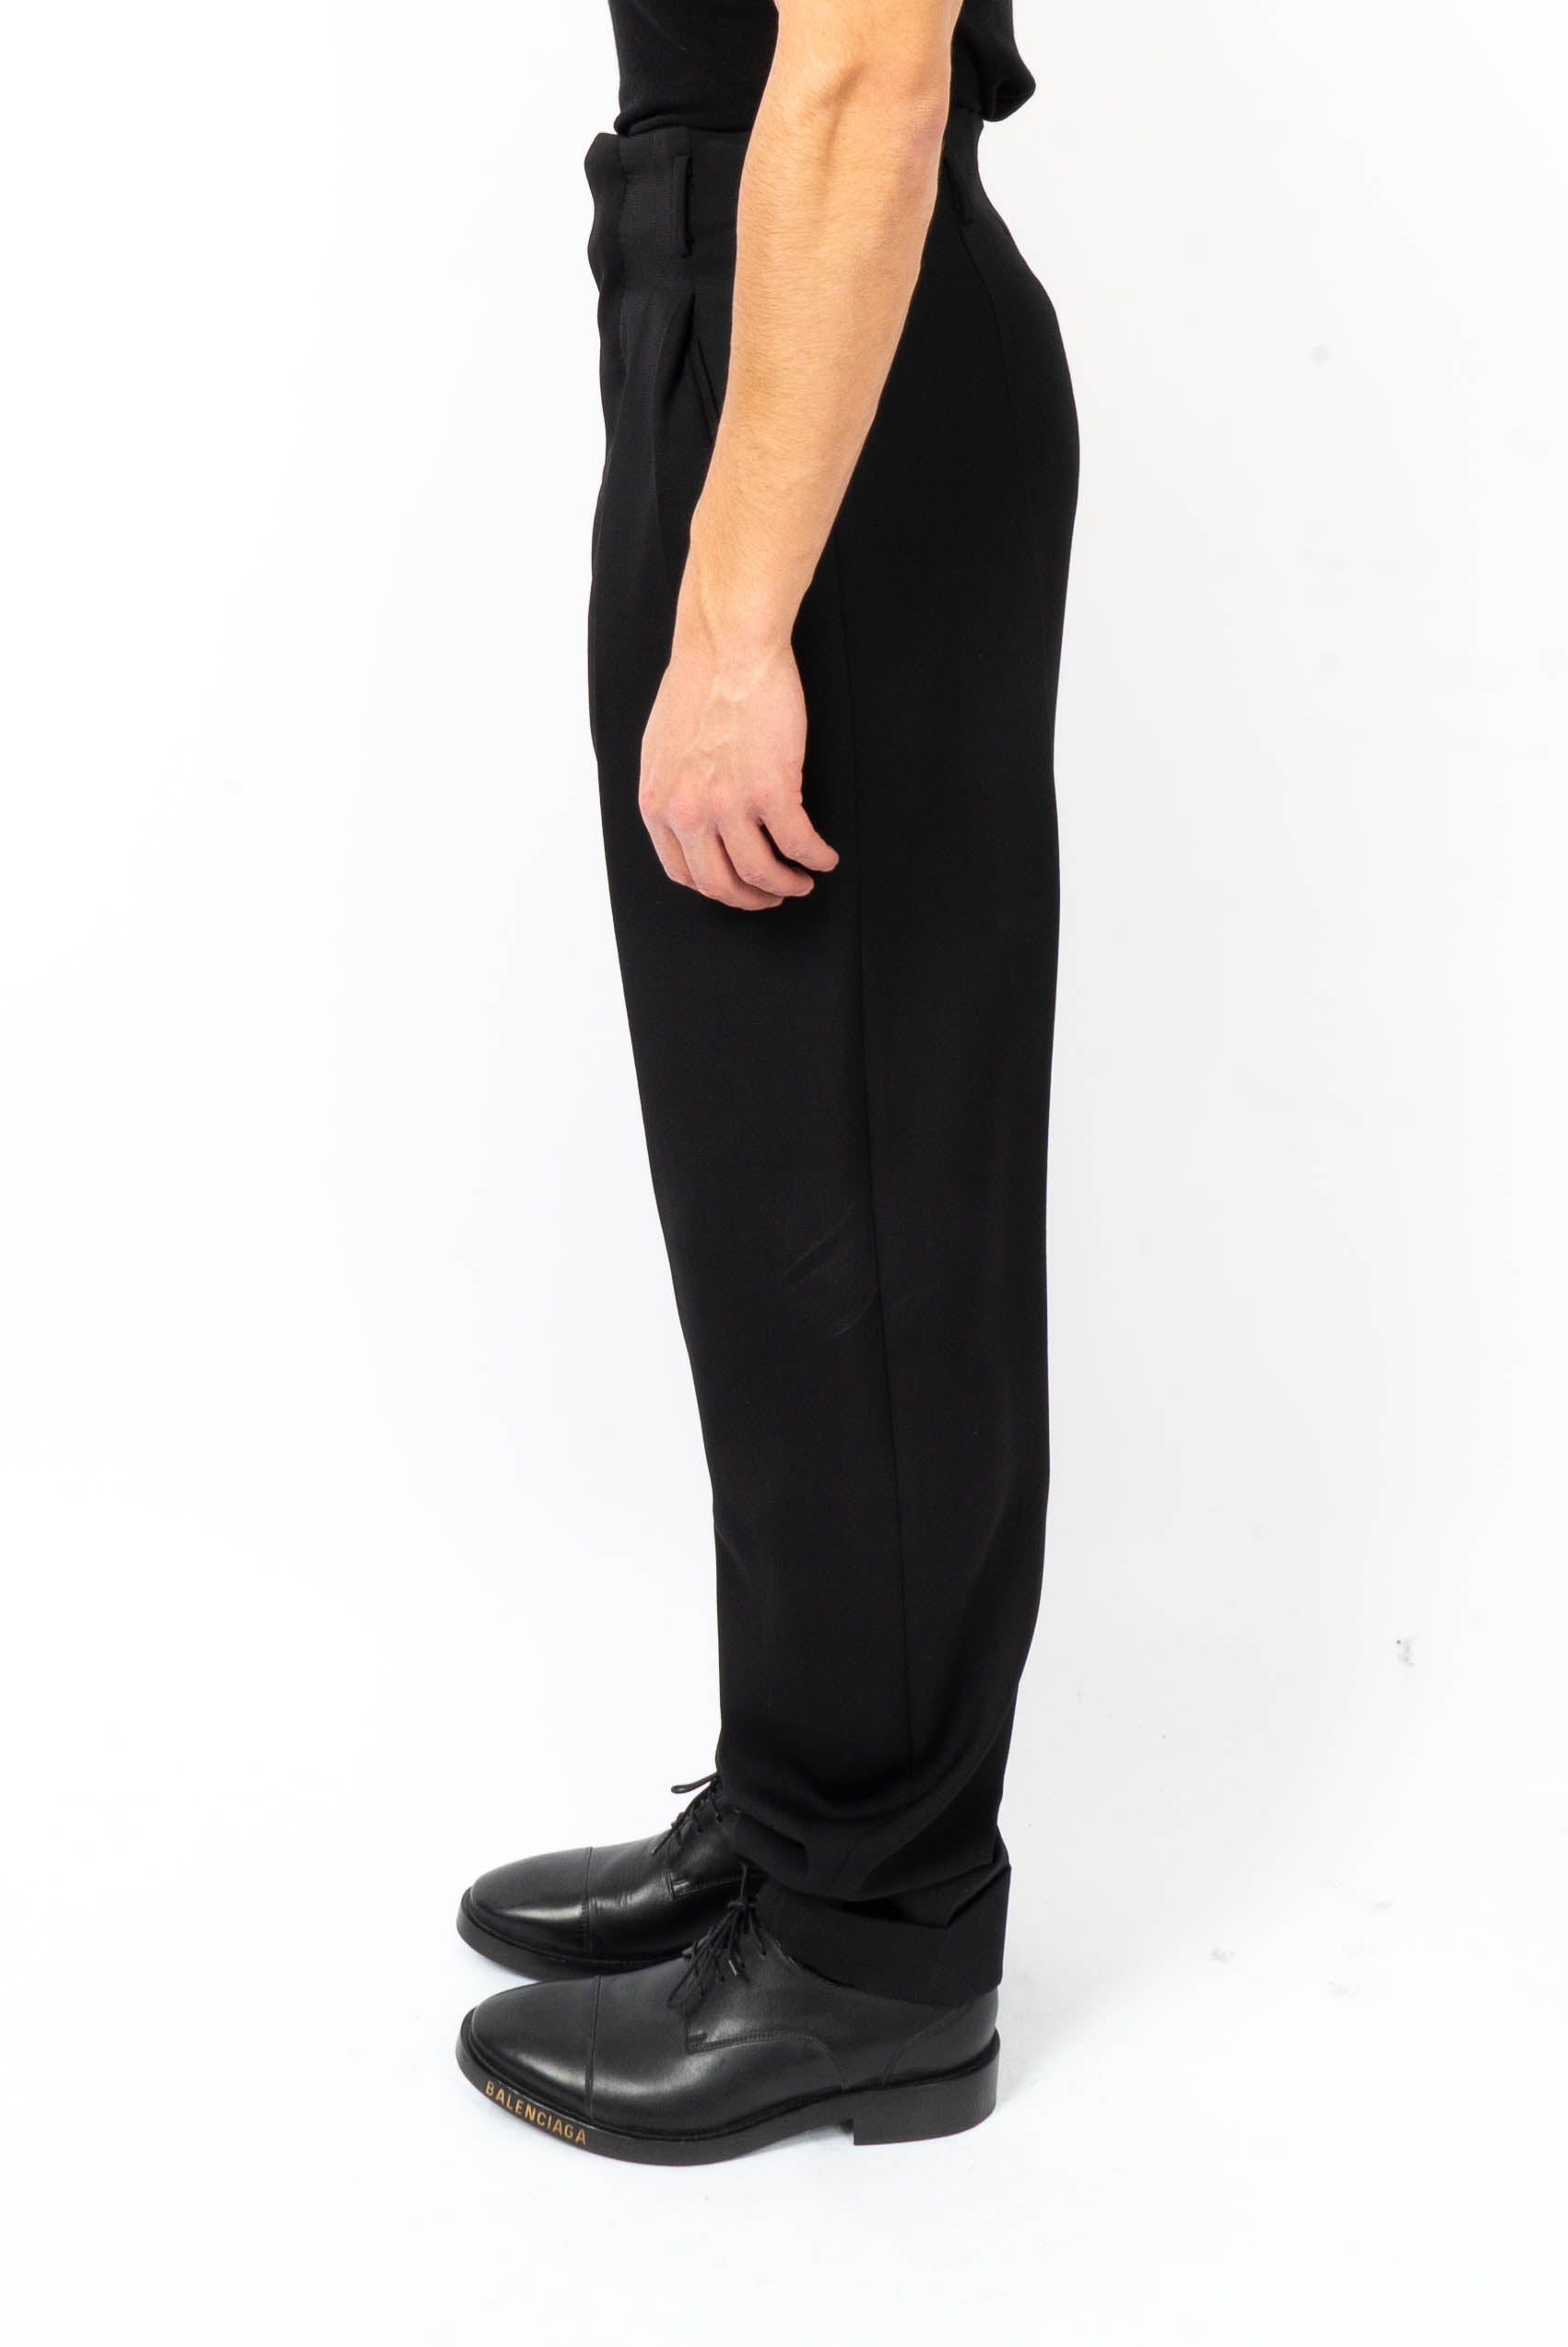 SS18 Black High Waisted Wool Trousers